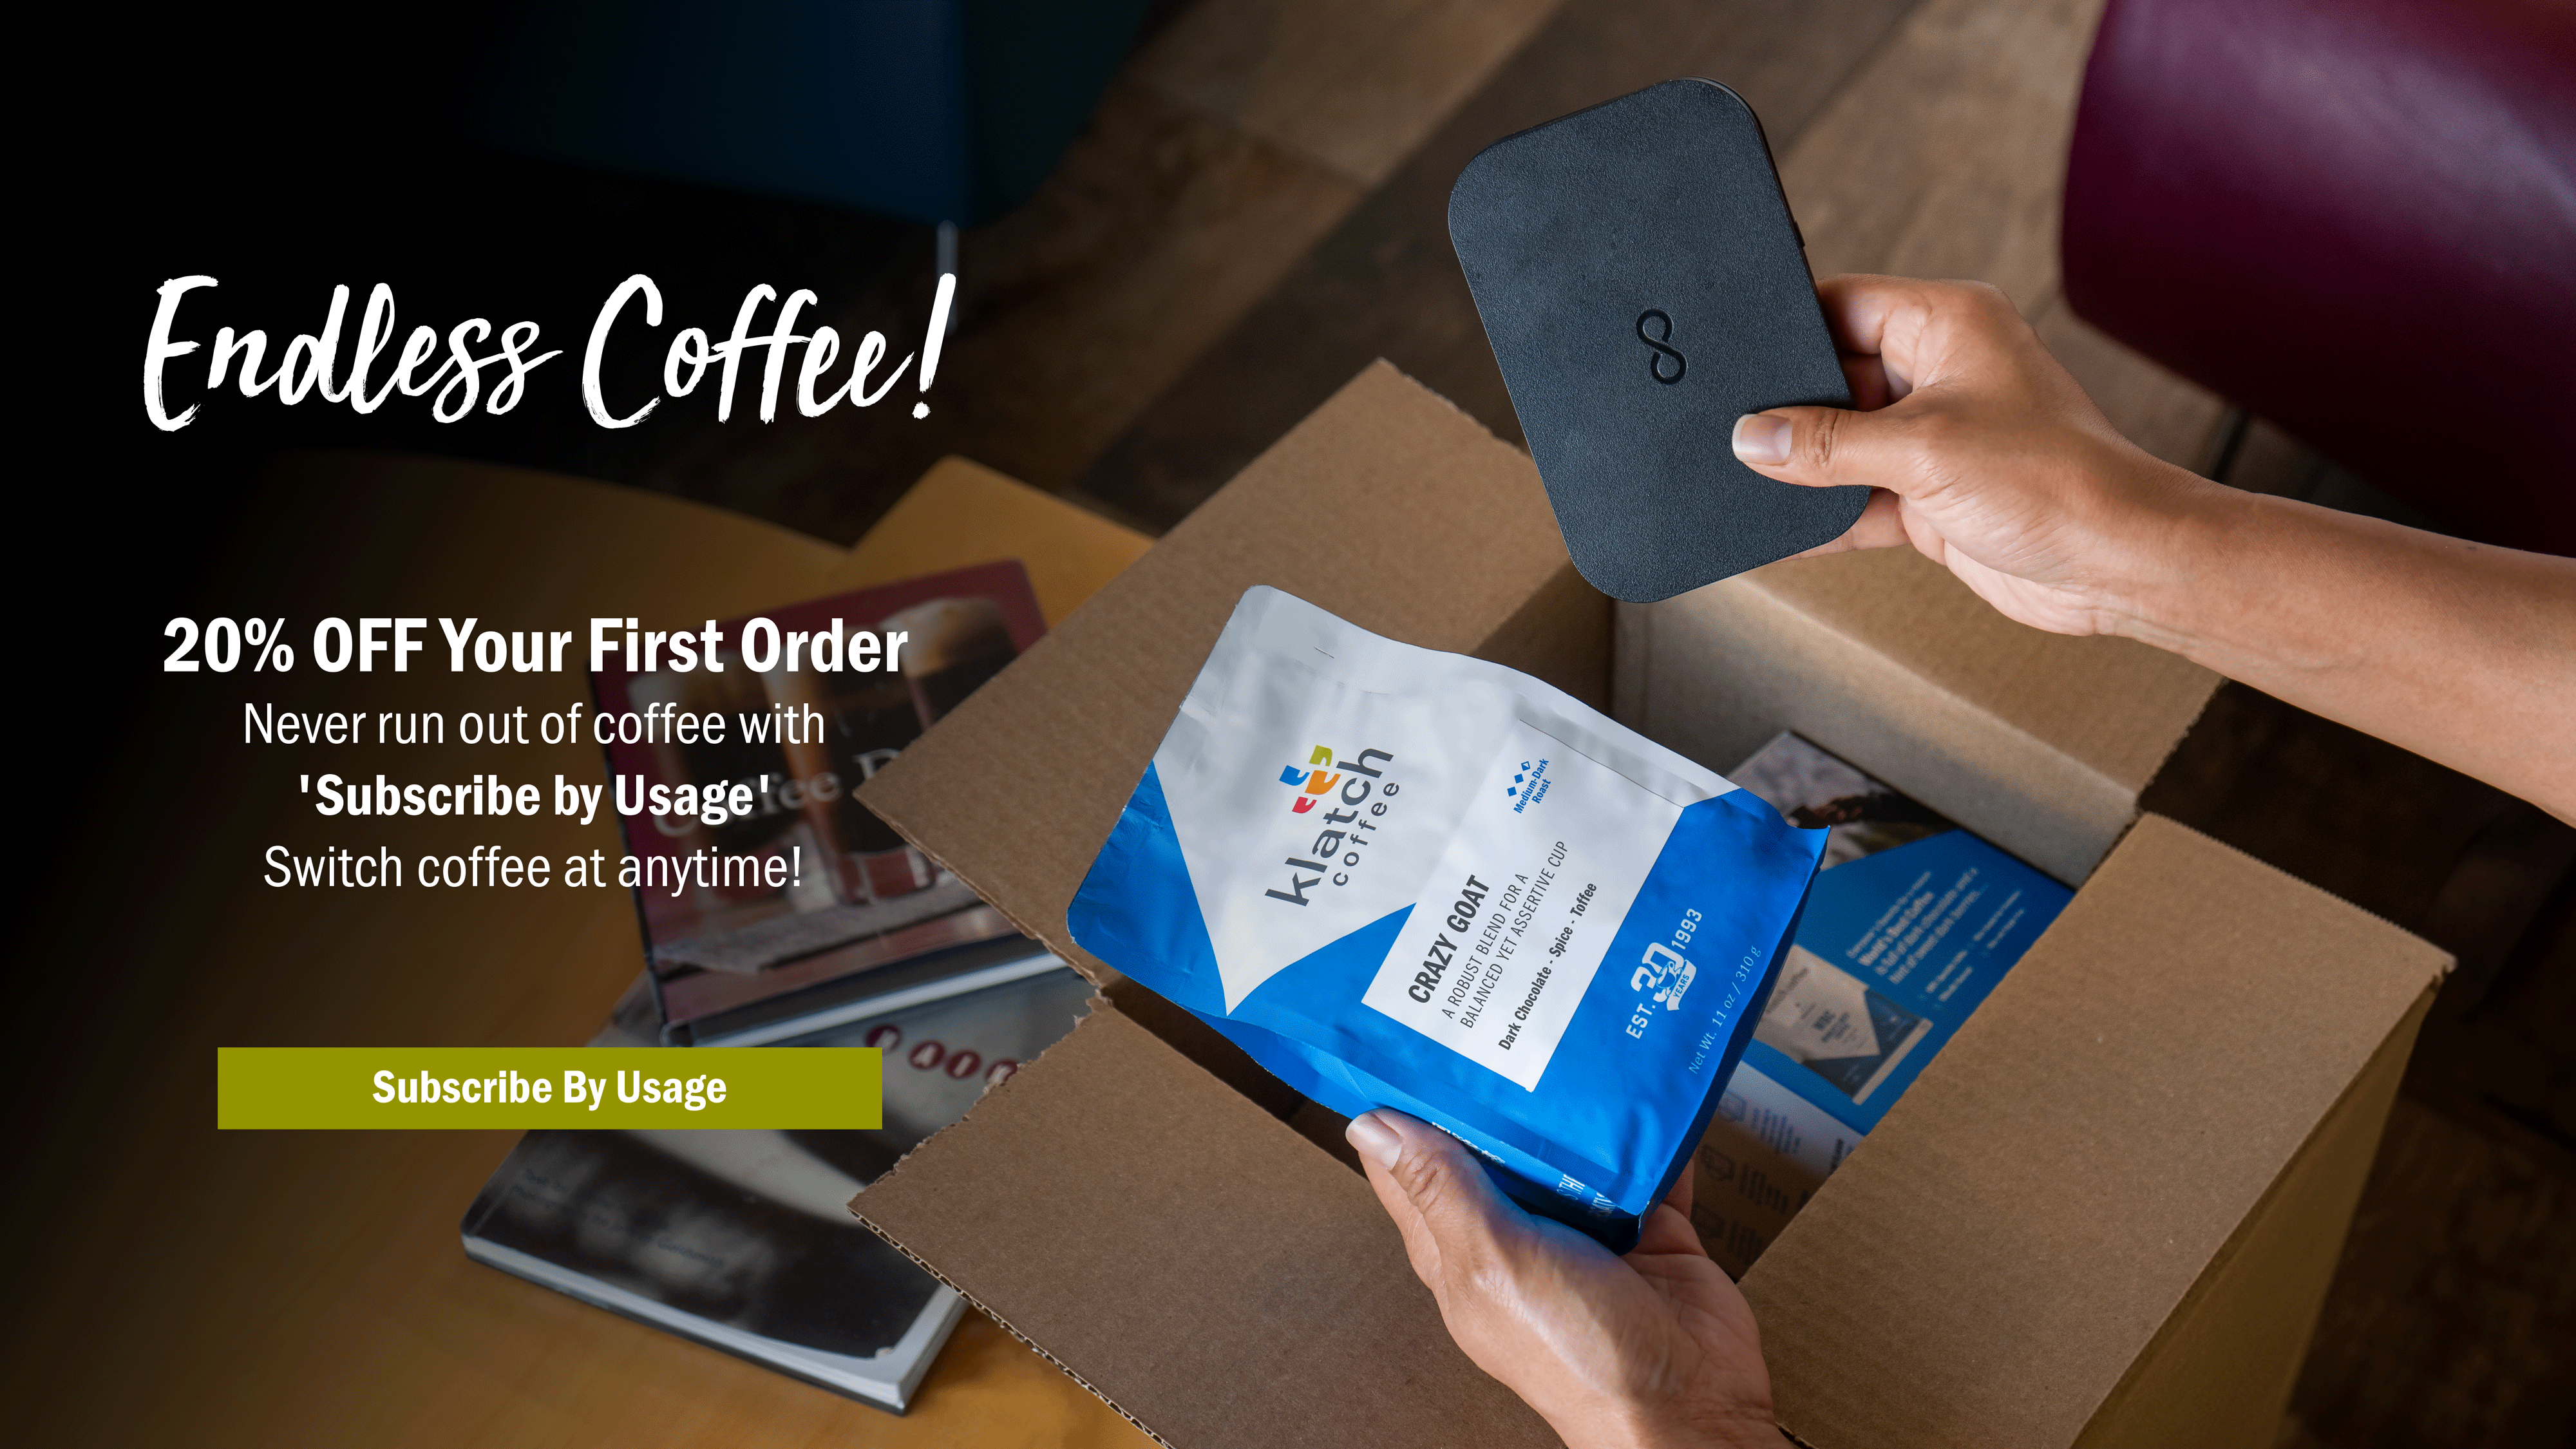 20% OFF Your First Order. Never run out of coffee with 'Subscribe by Usage'. Switch coffee at anytime.